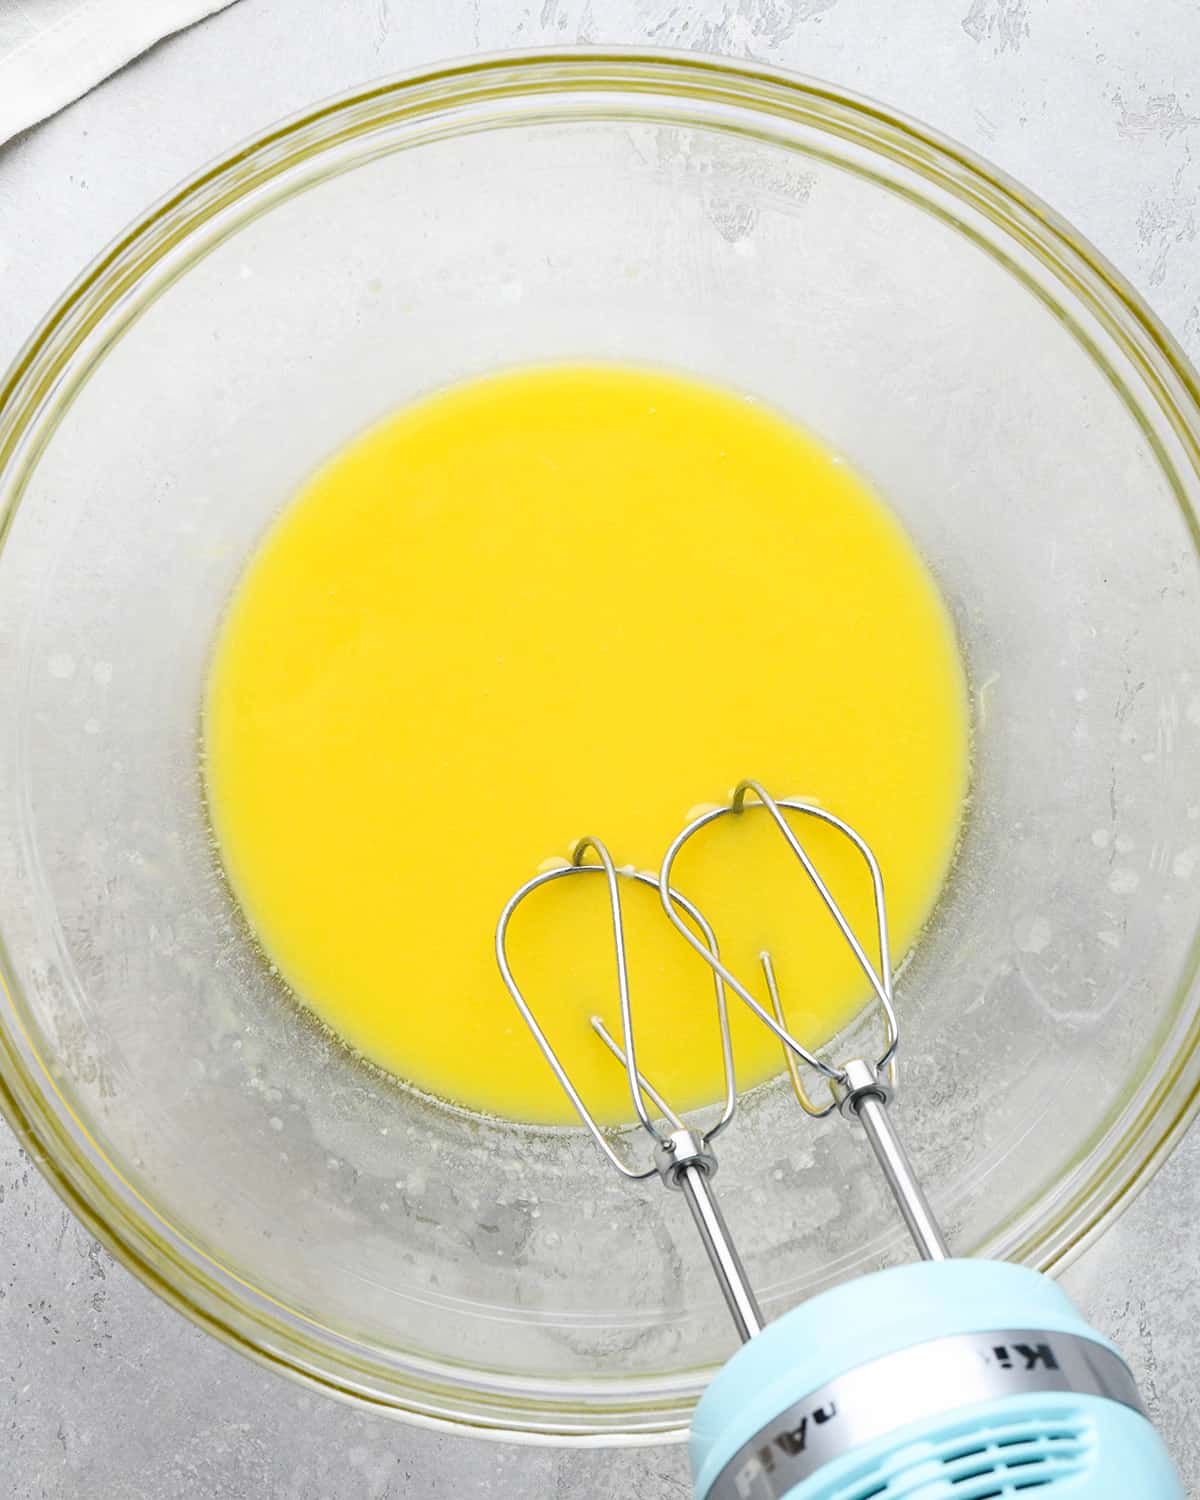 How to Make Waffles - egg yolks in a bowl after beating